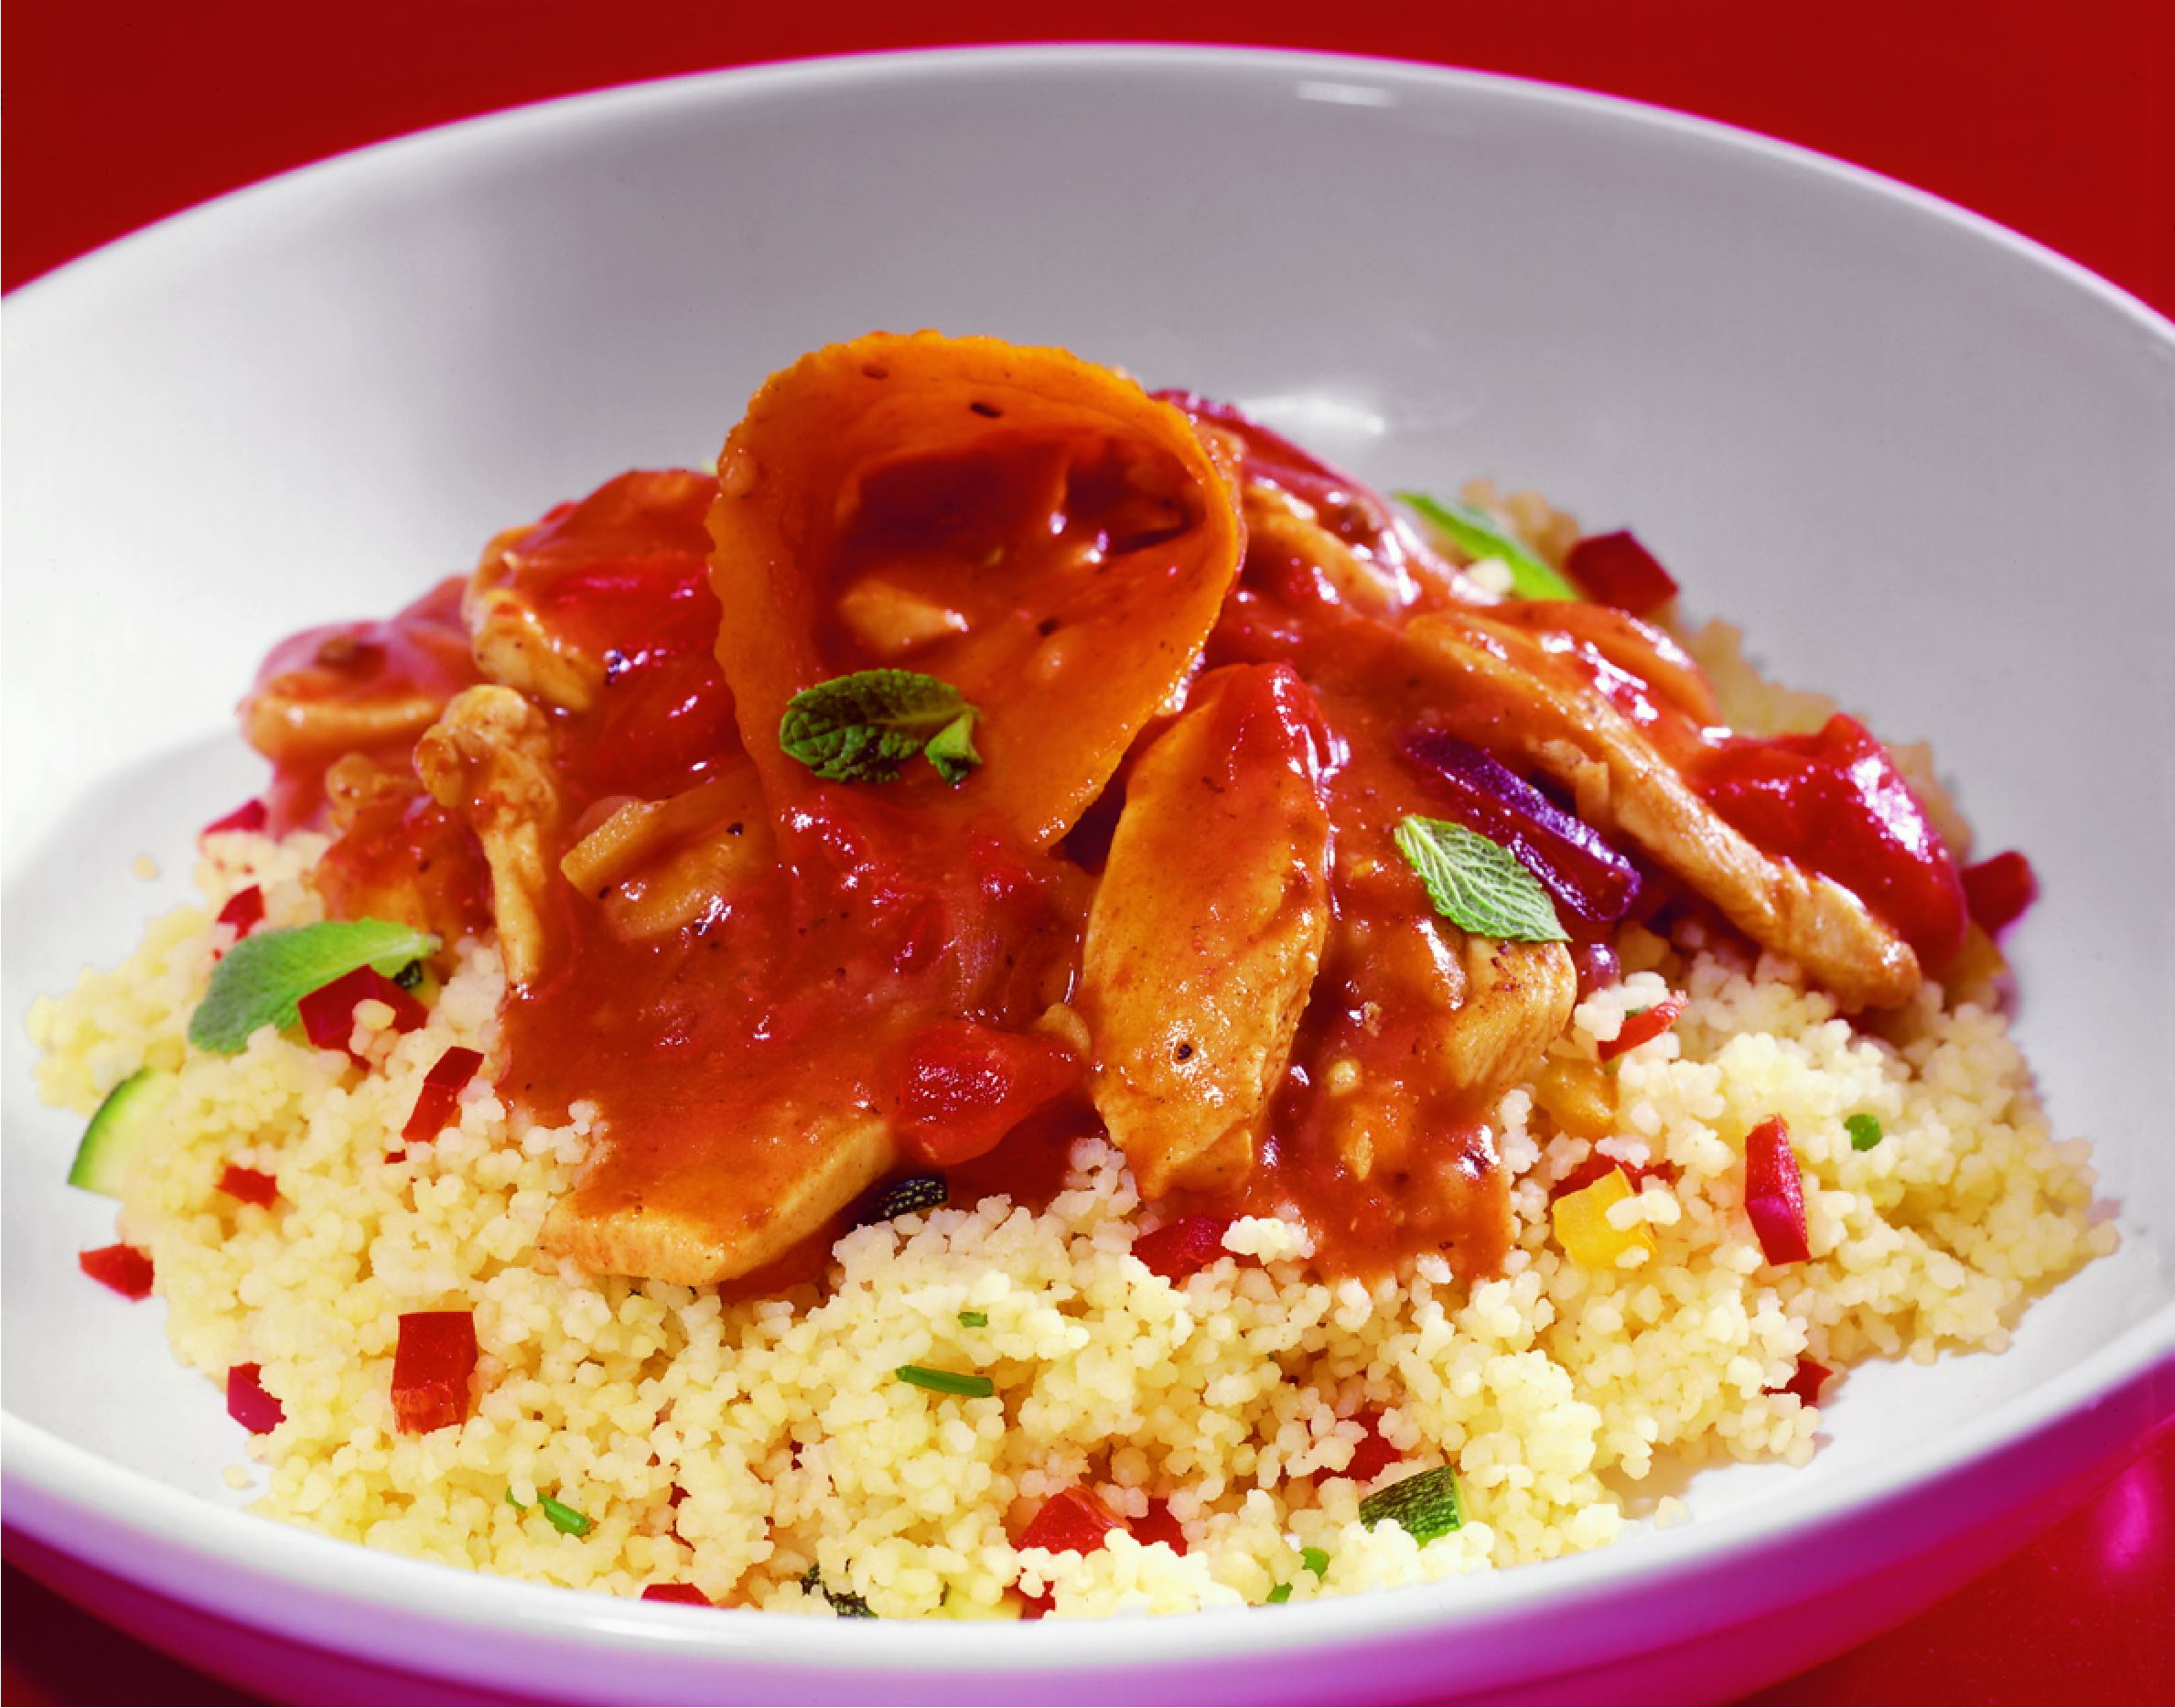 Tunisian Chicken in a rich, spicy orange sauce served on a bed of couscous